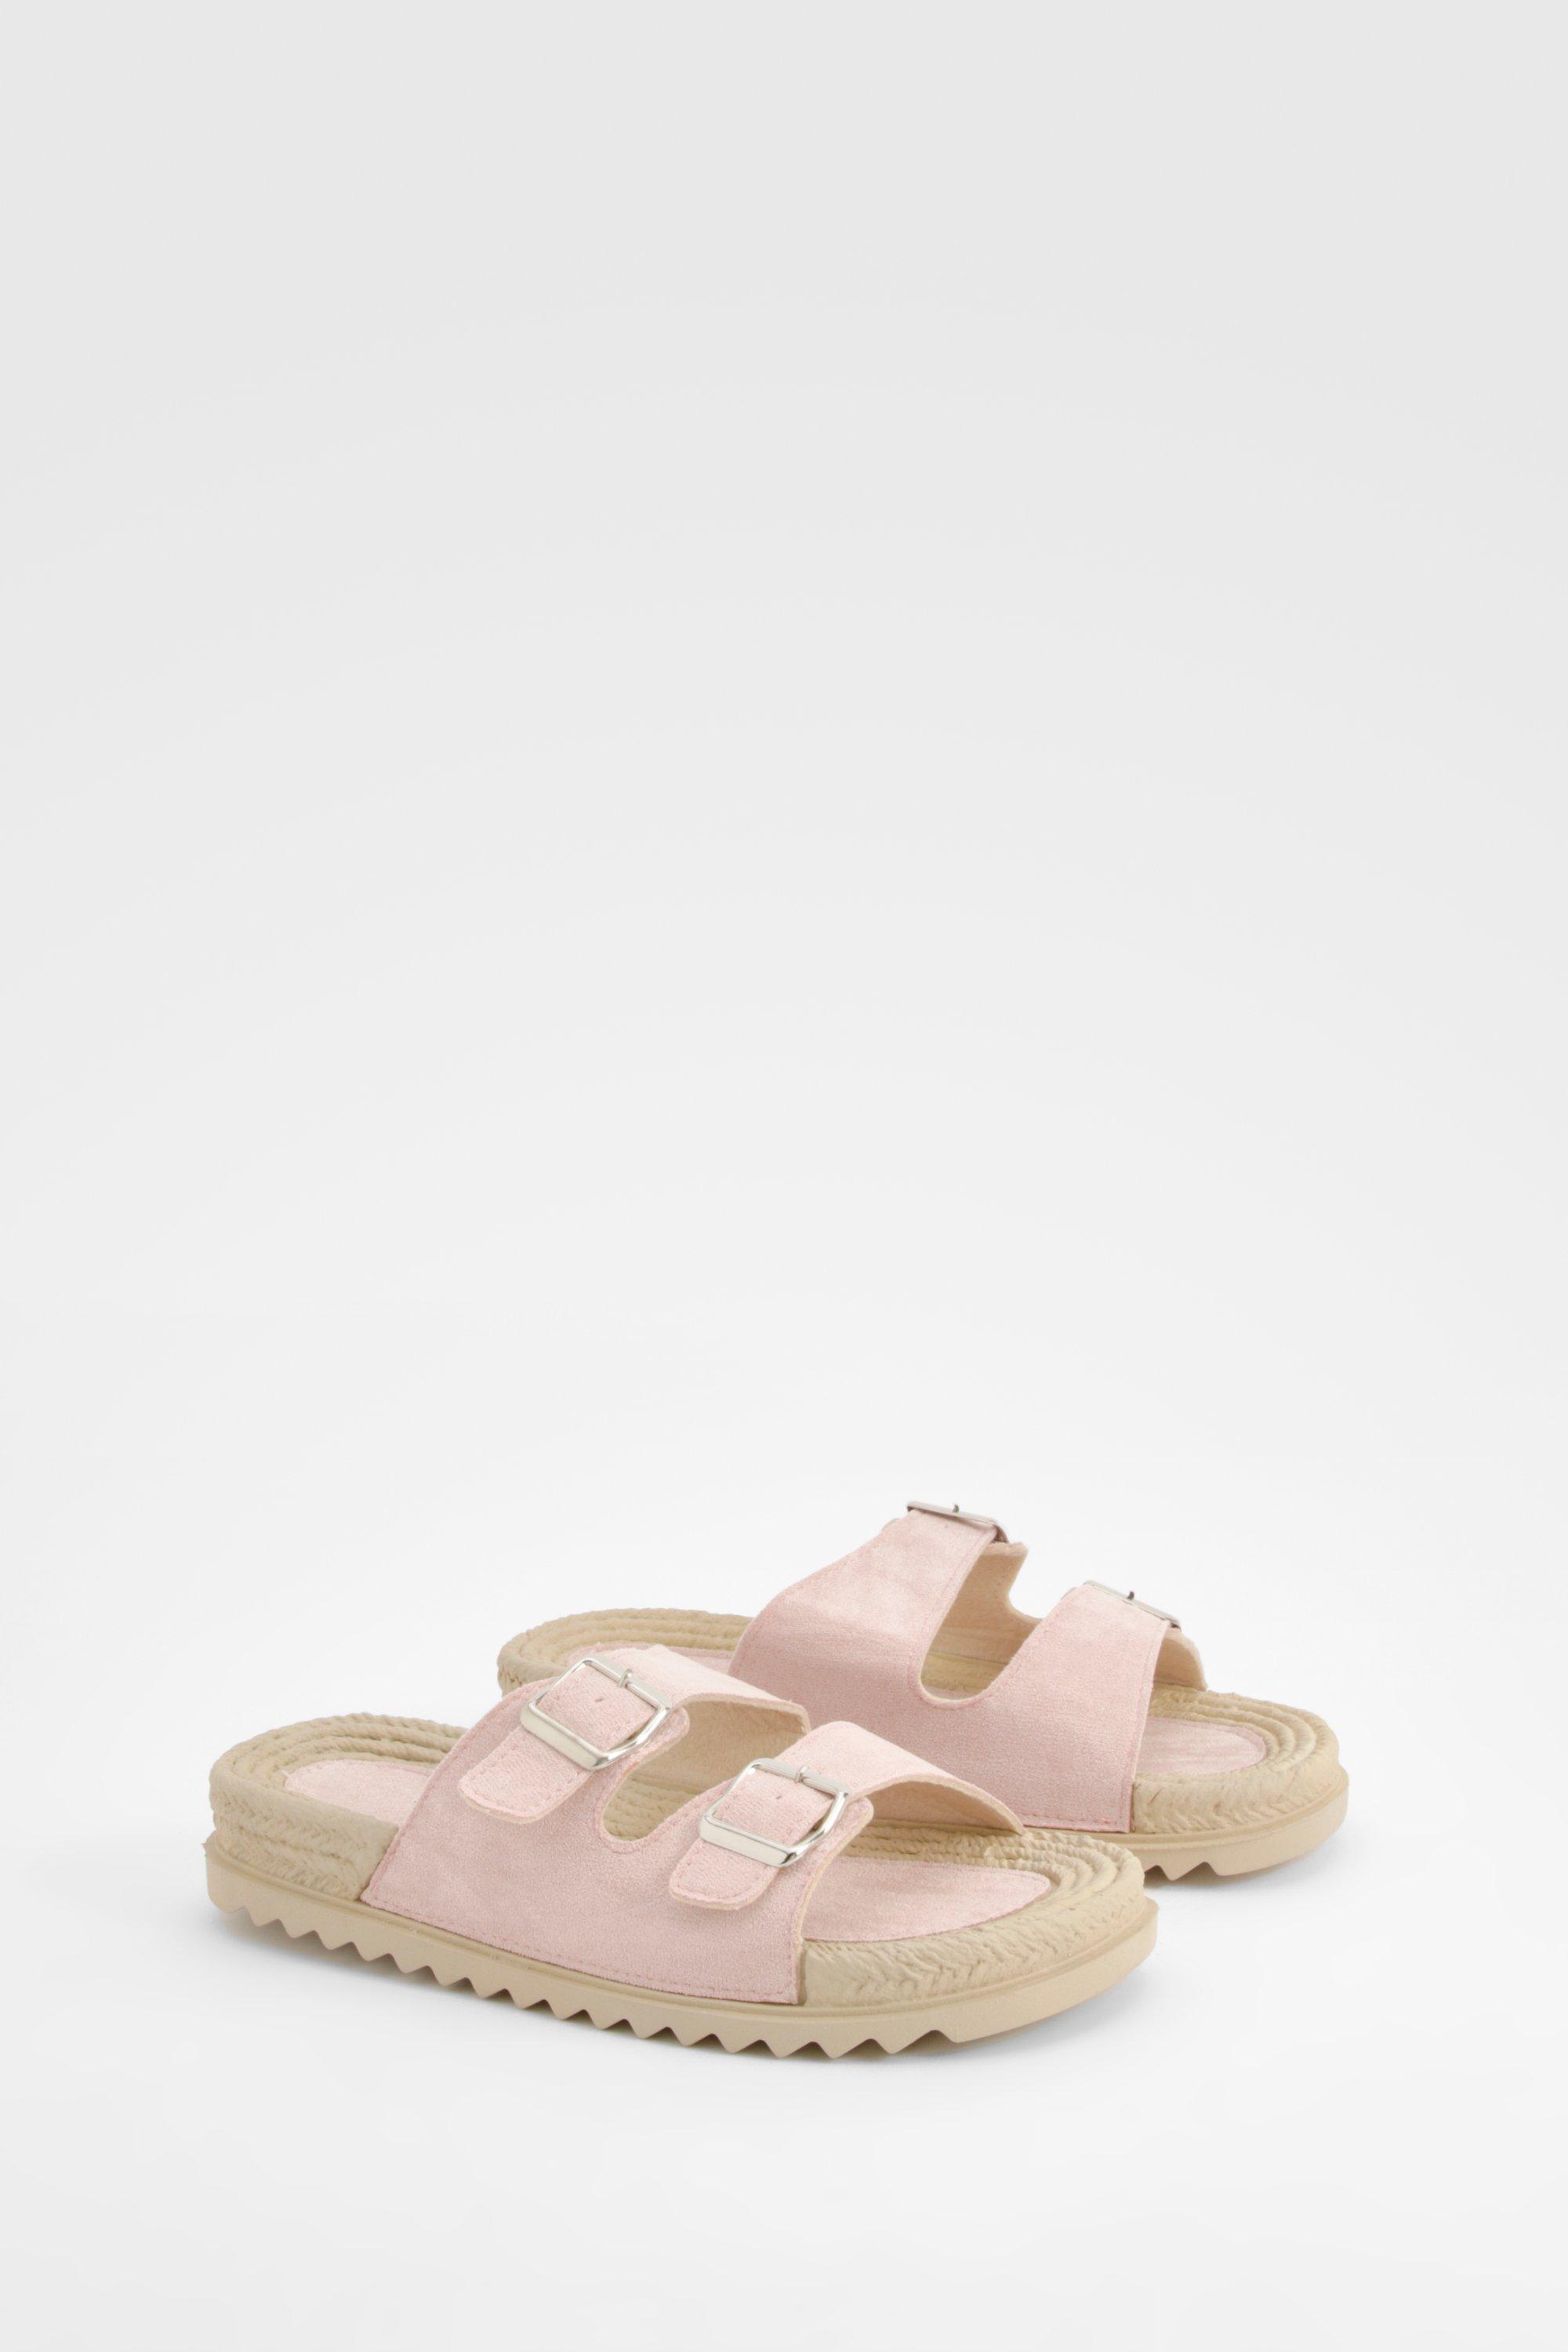 Image of Double Strap Buckle Detail Espadrille Sliders, Pink